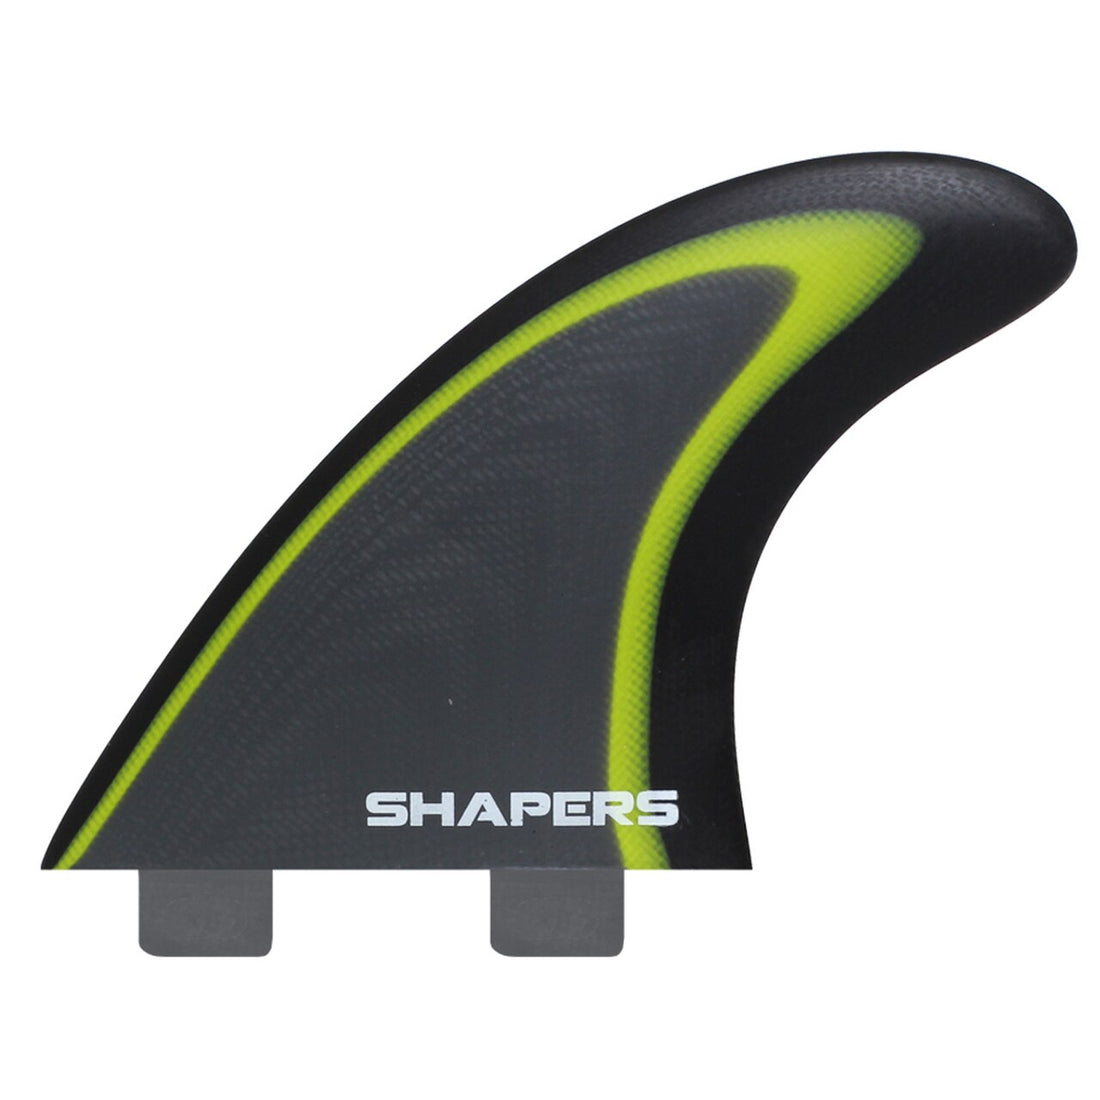 Shapers Fins - Core 1 (FCS 1) - Large - Lime Green